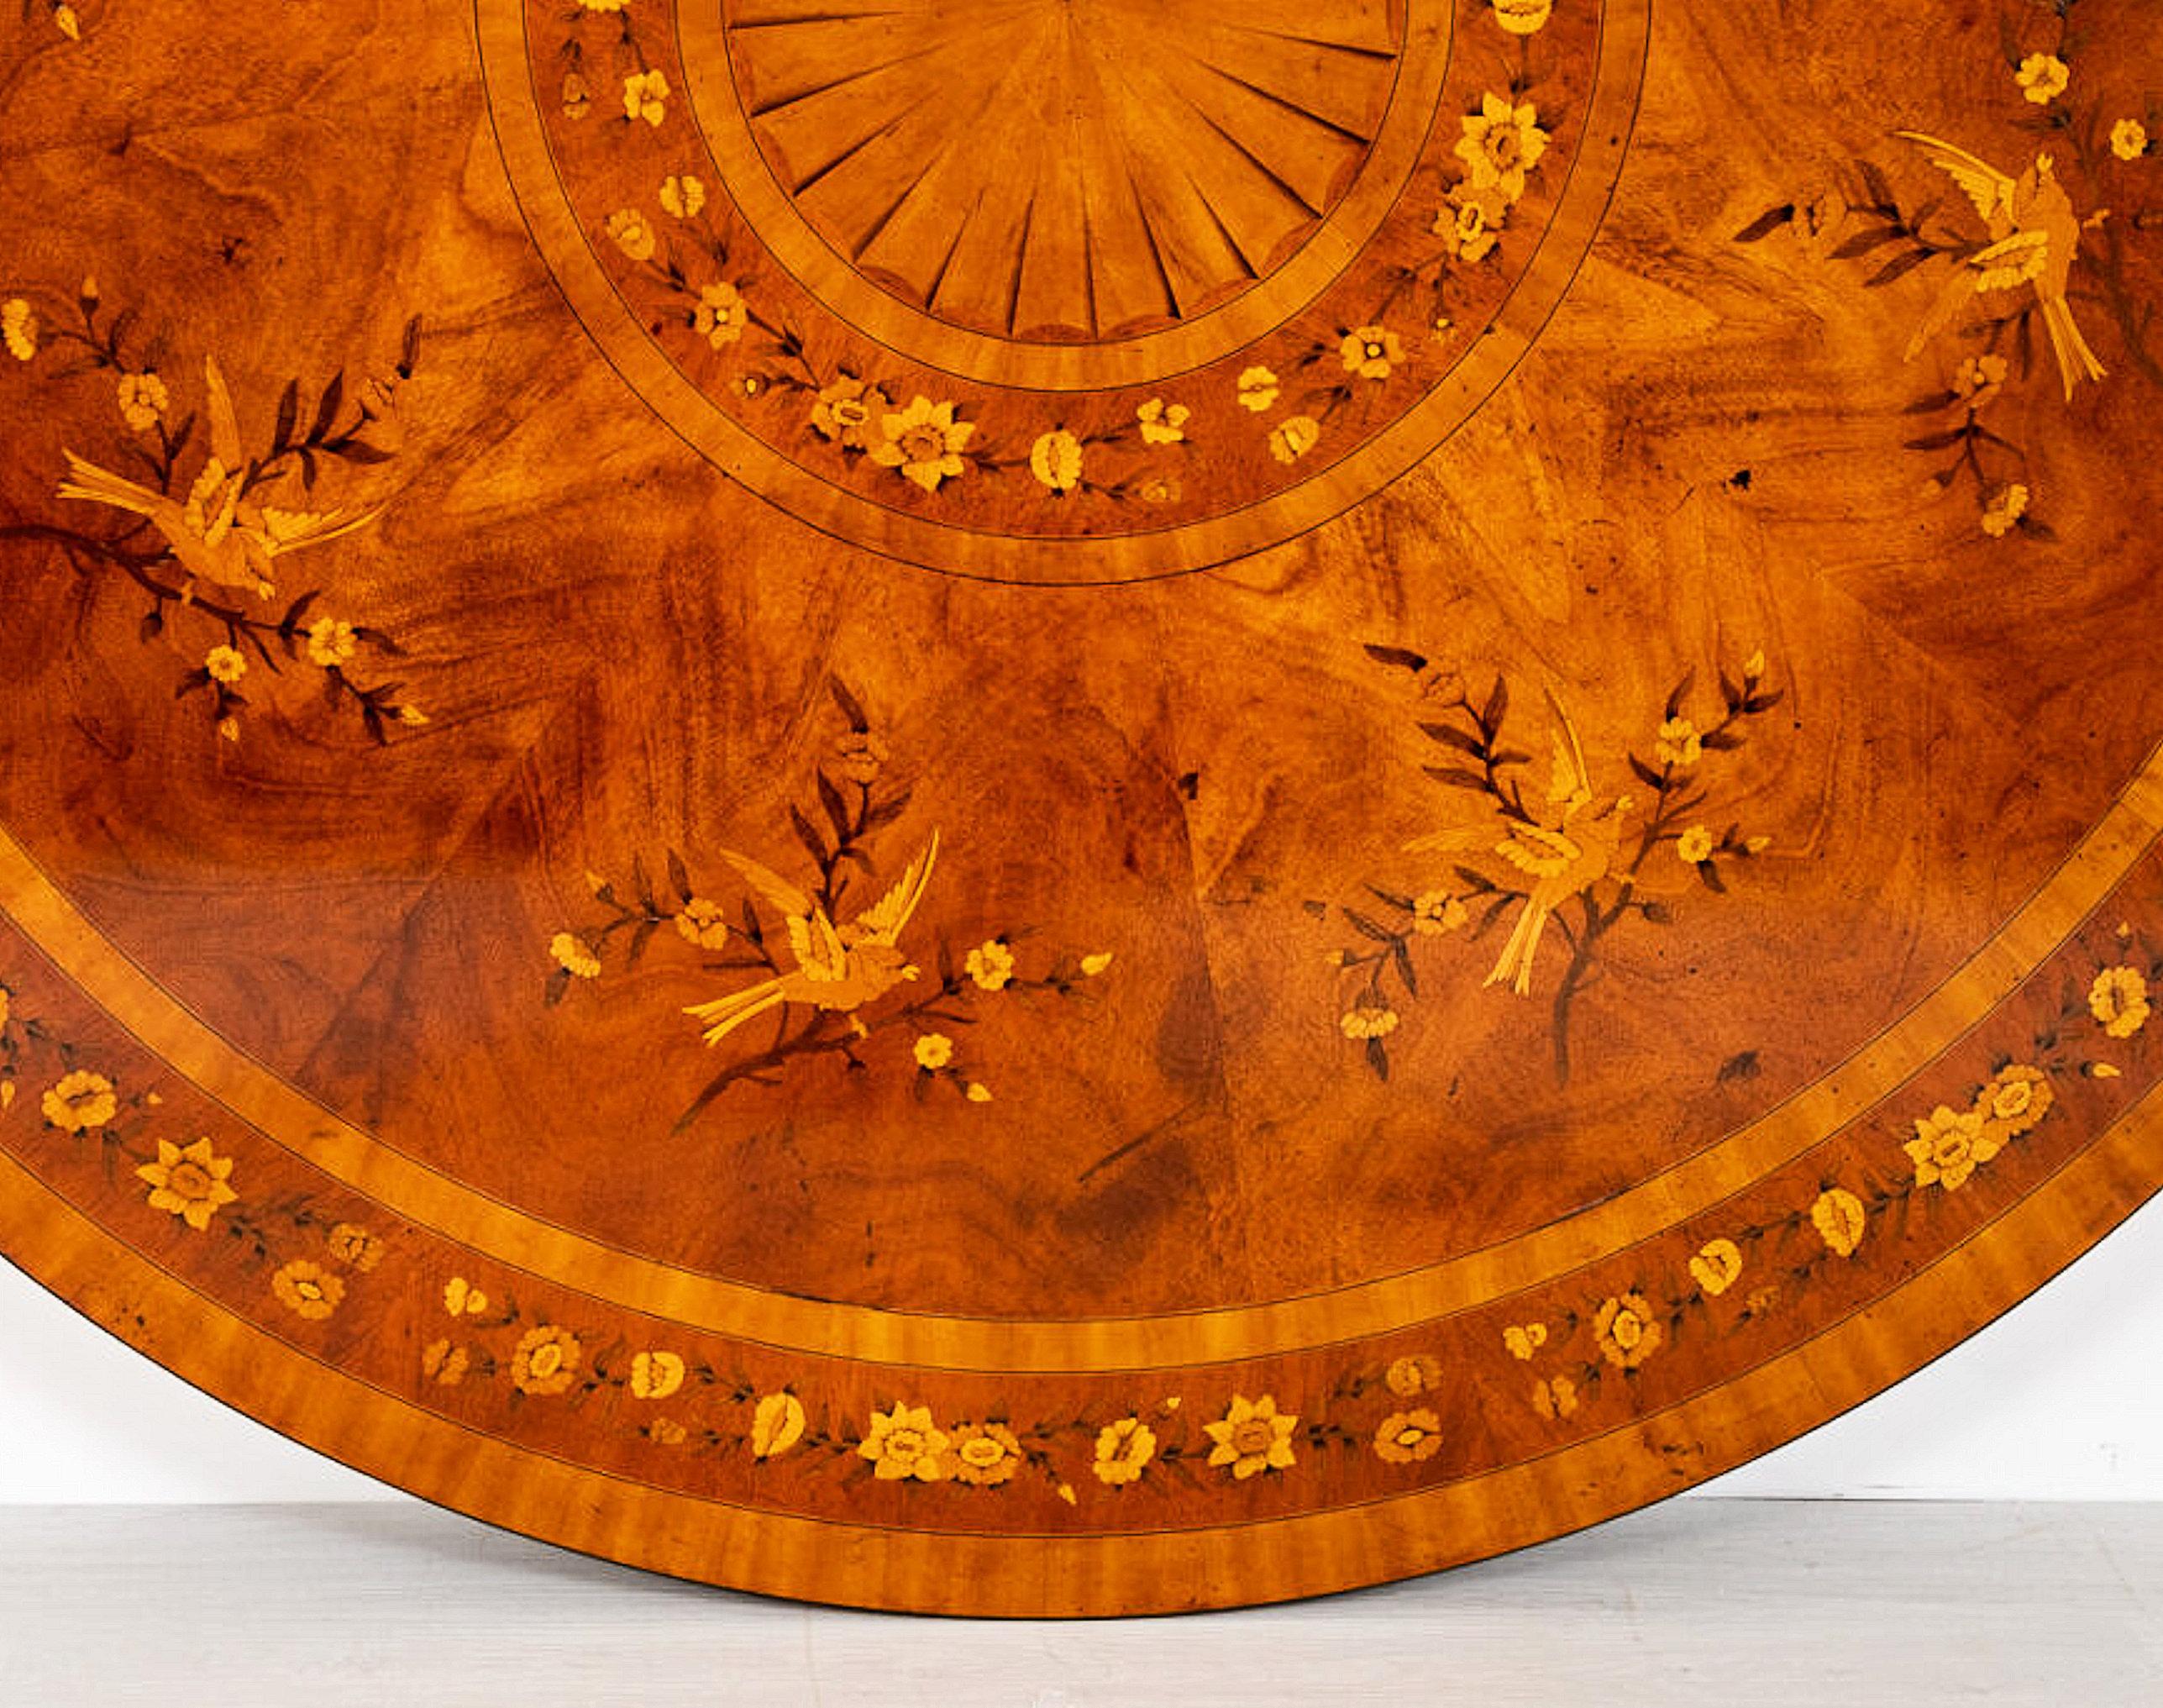 This superb quality and finely detailed mahogany marquetry dining table features a segmented centre circle with a banded and floral marquetry border and a bird motif around the center with another floral ring along the border edge. The border of the